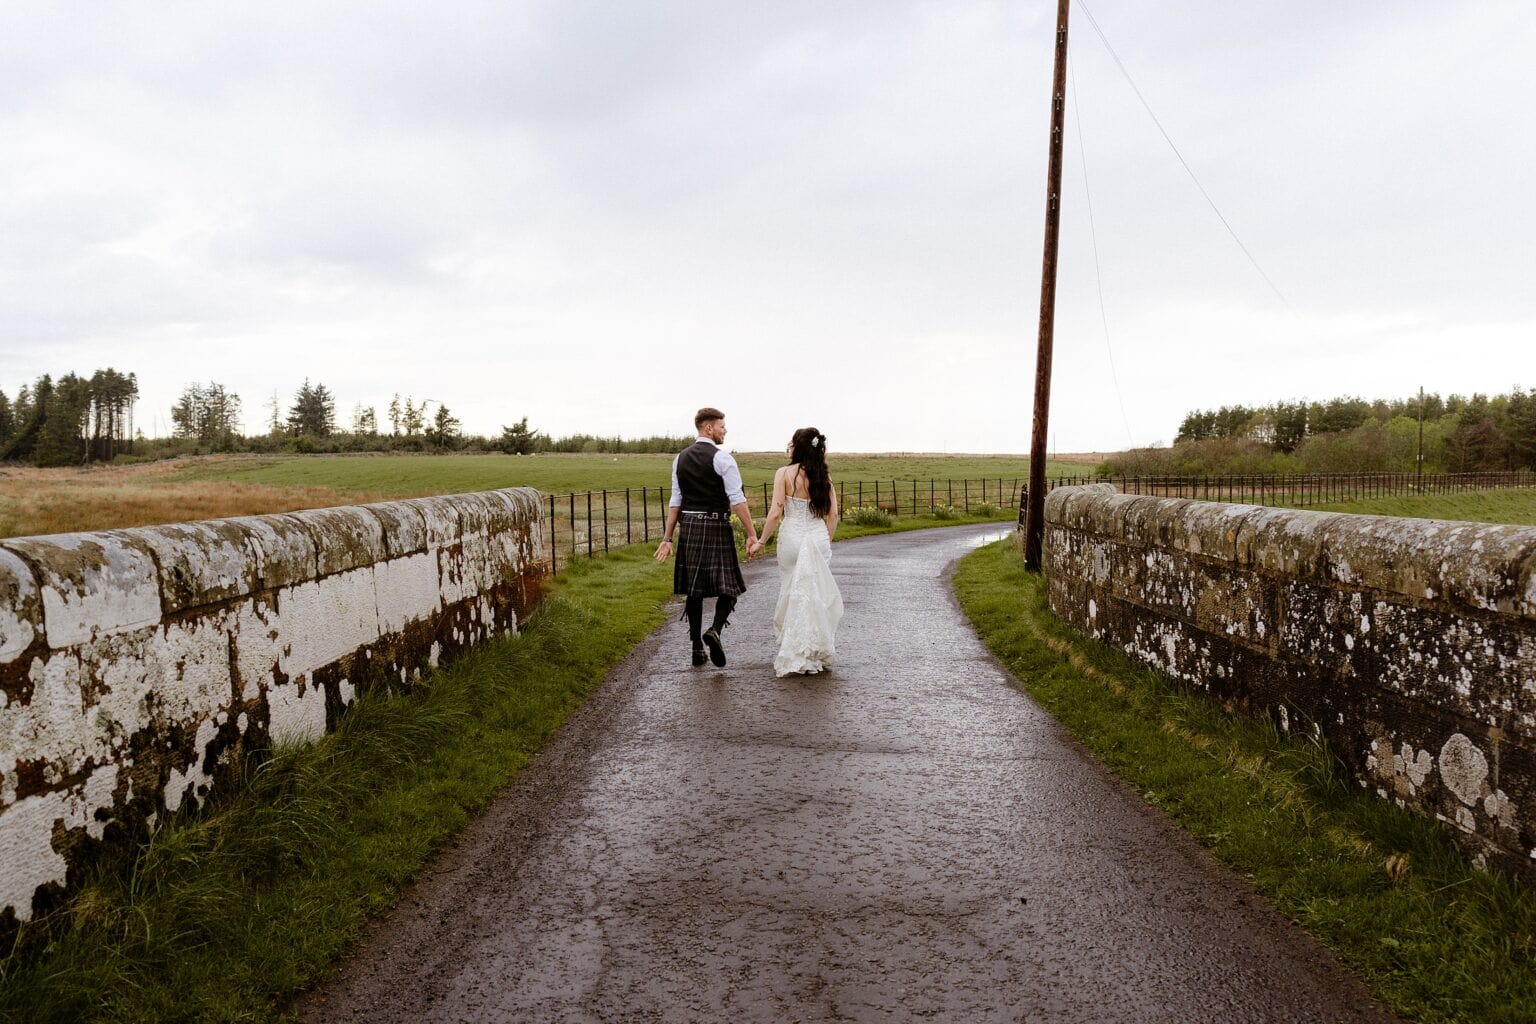 the bride and groom walk along a country path between stone walls with grass trees and sheep in the distance outside their barn wedding venues west lothian scotland